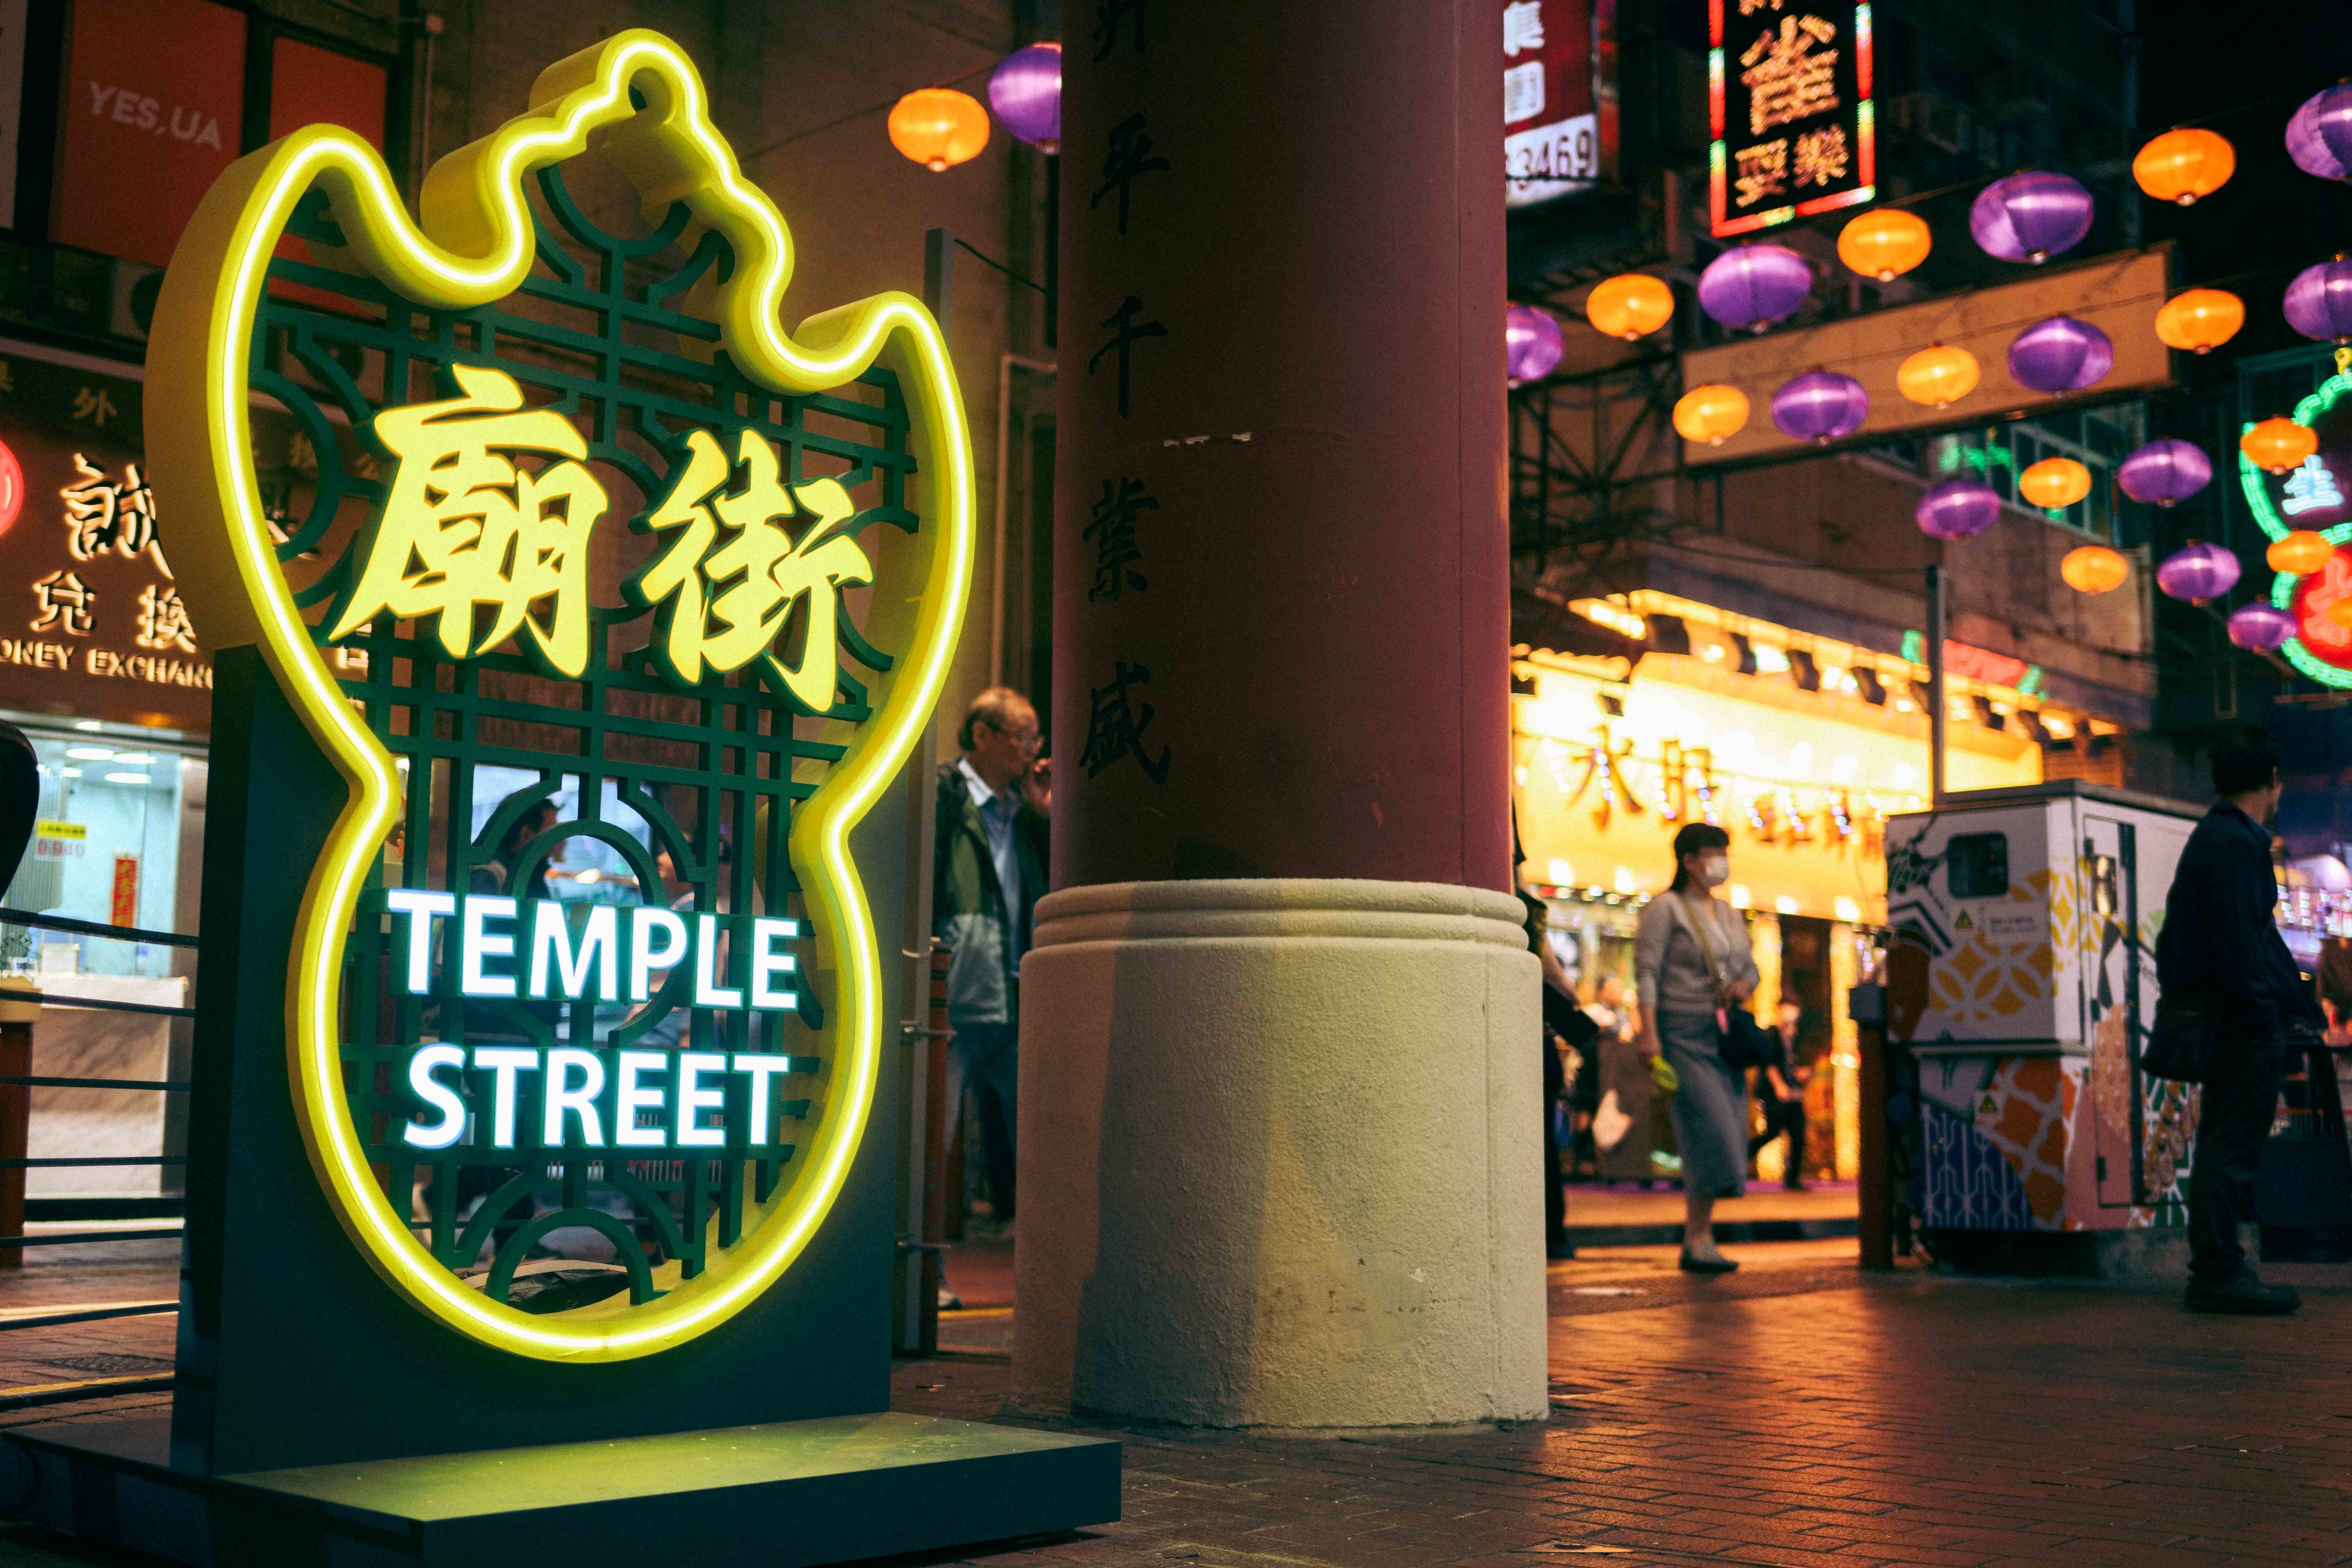 Neon sign for Temple Street with Chinese characters, at a busy evening market street